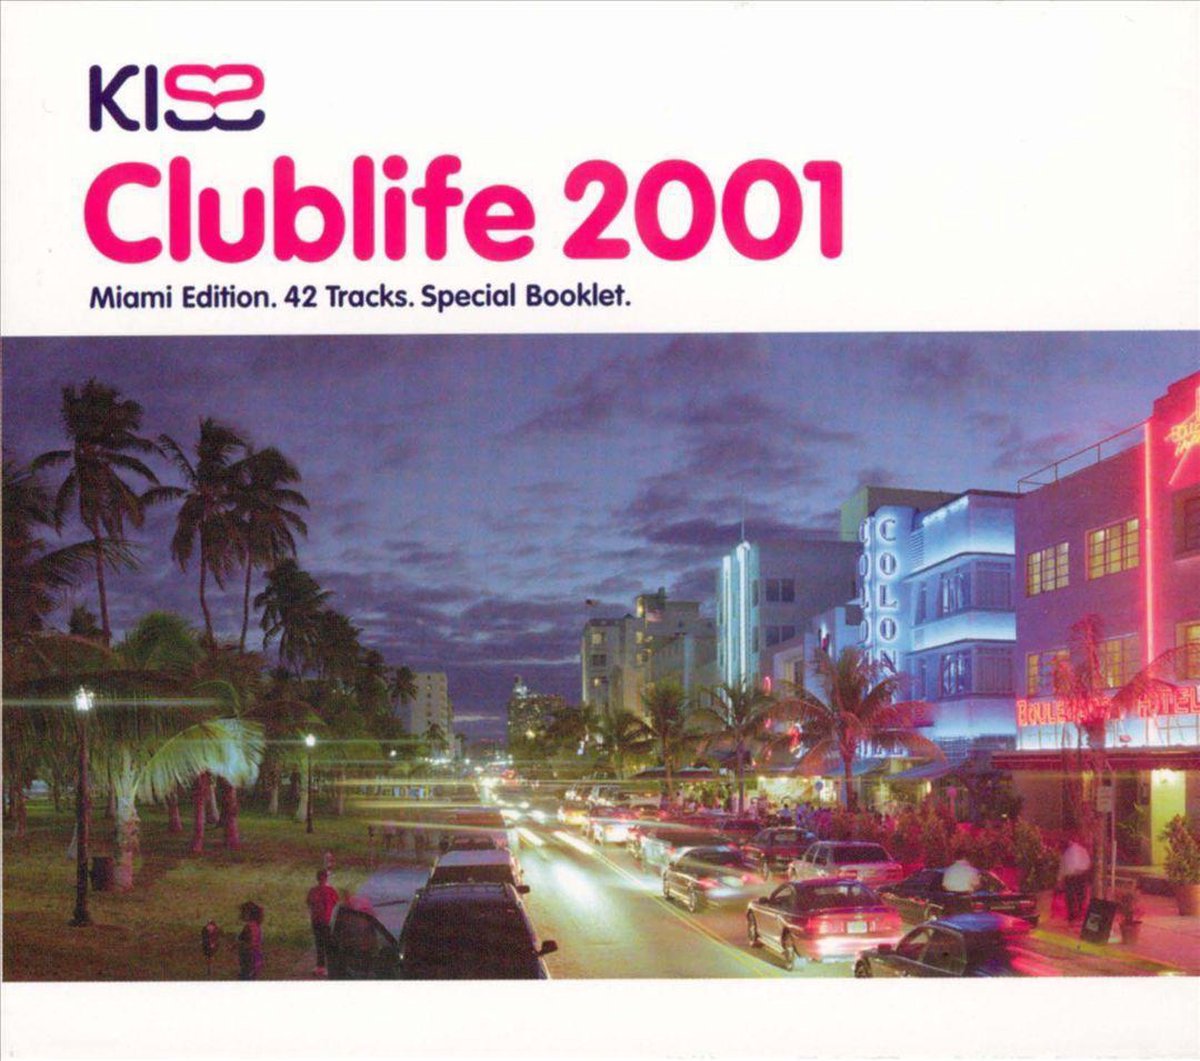 Kiss Clublife 2001 - various artists